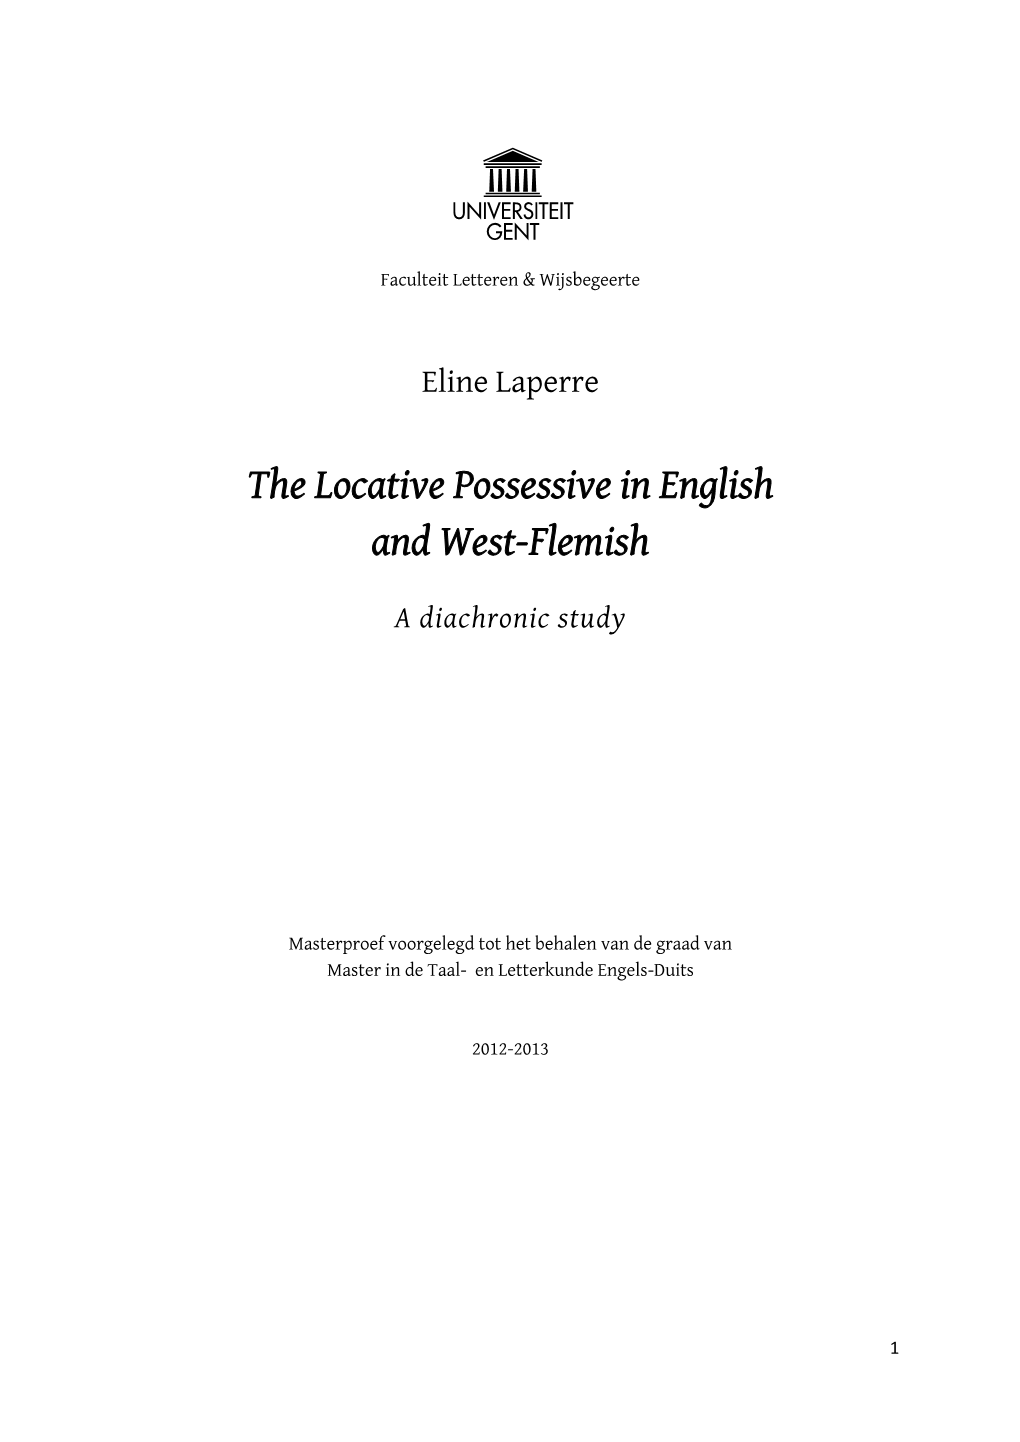 The Locative Possessive in English and West-Flemish